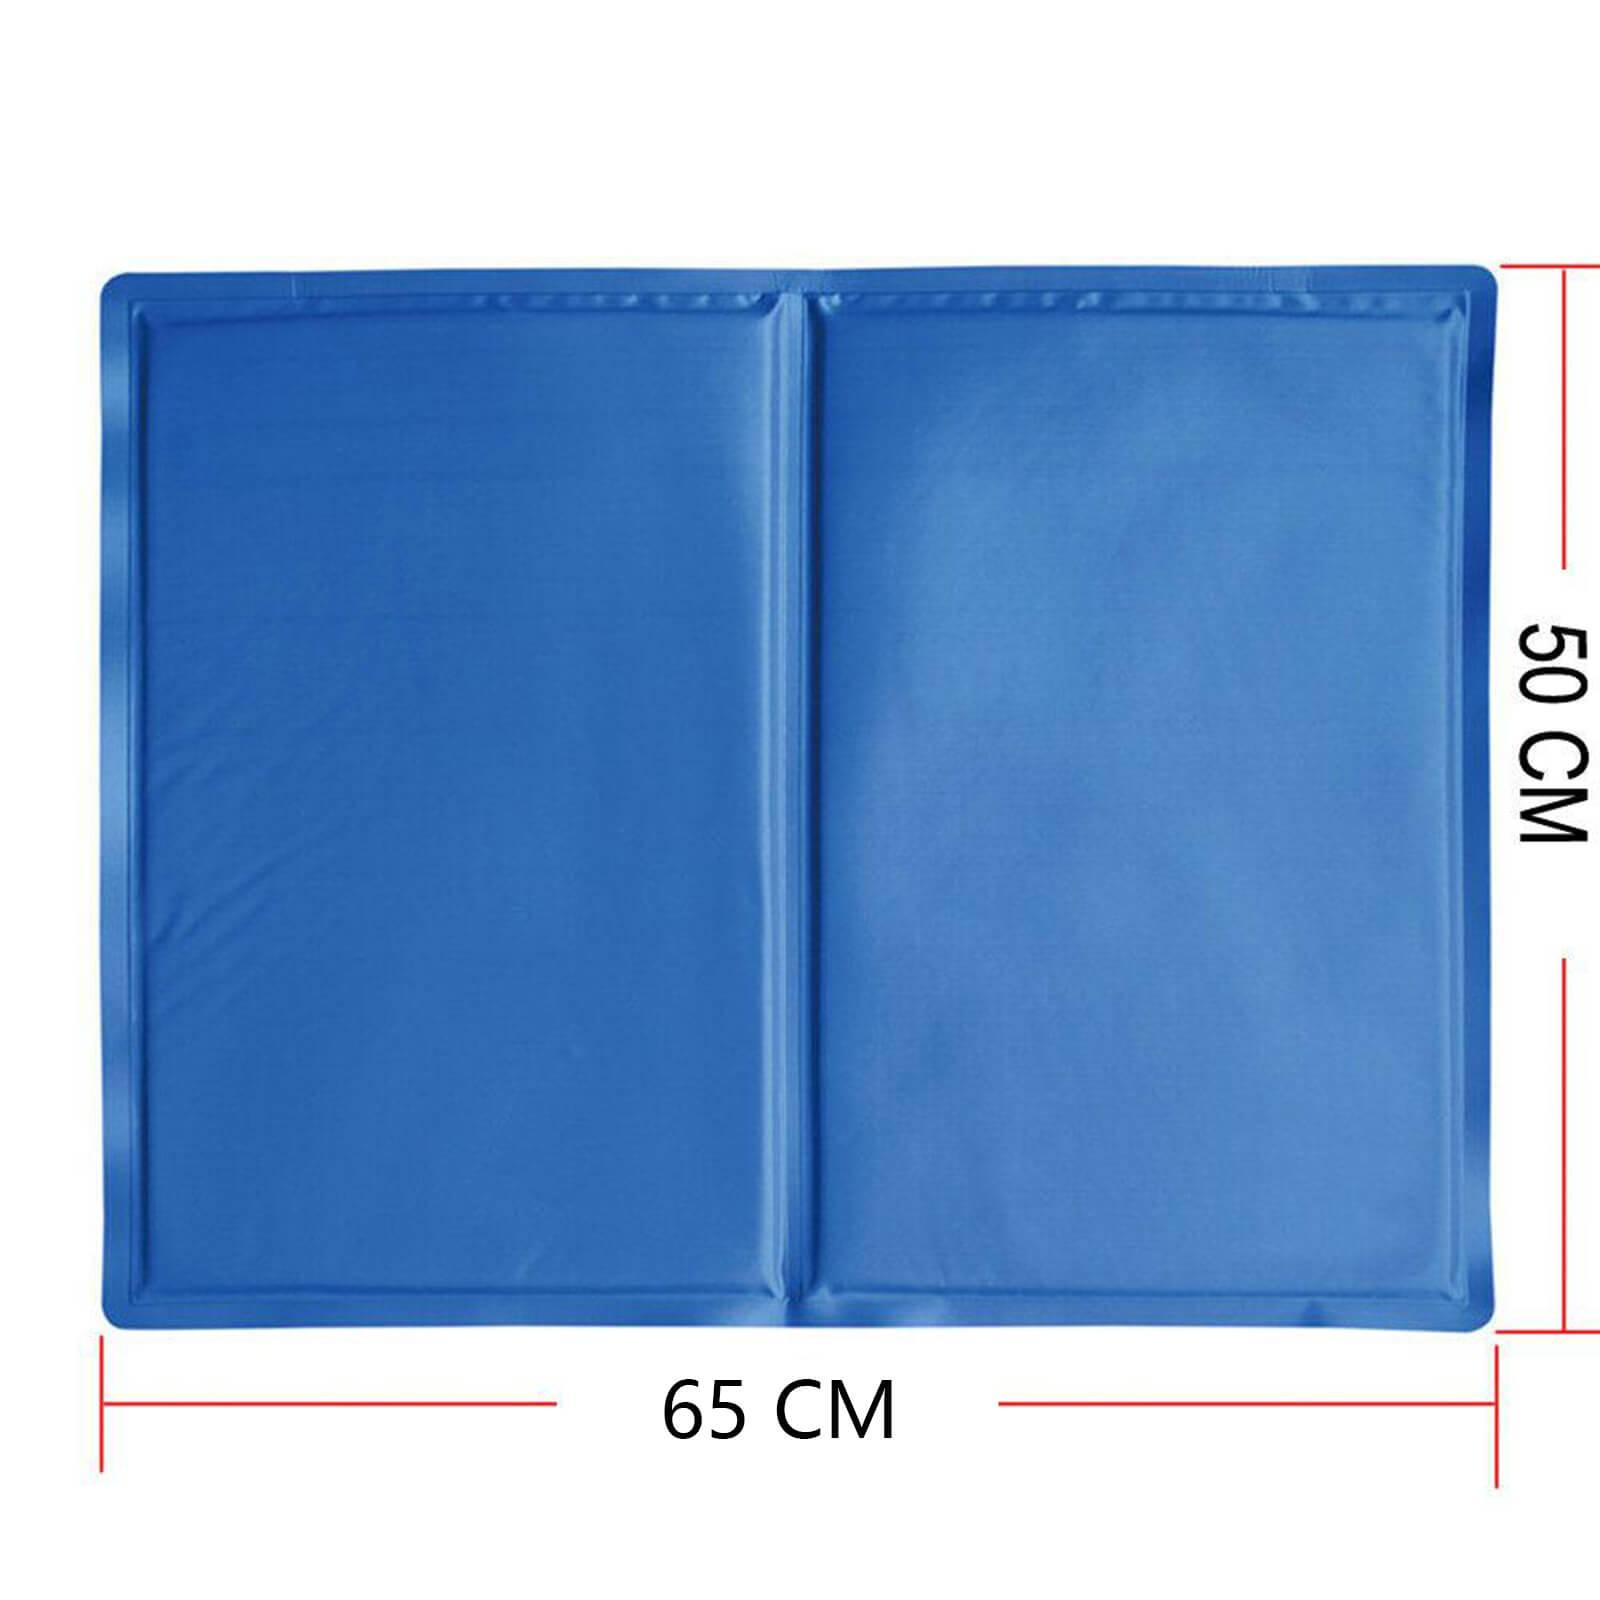 Non-Toxic Pet Self Cooling Pad Cold Mat for Dog Cat Bed Kennels Crates Sparesbarn